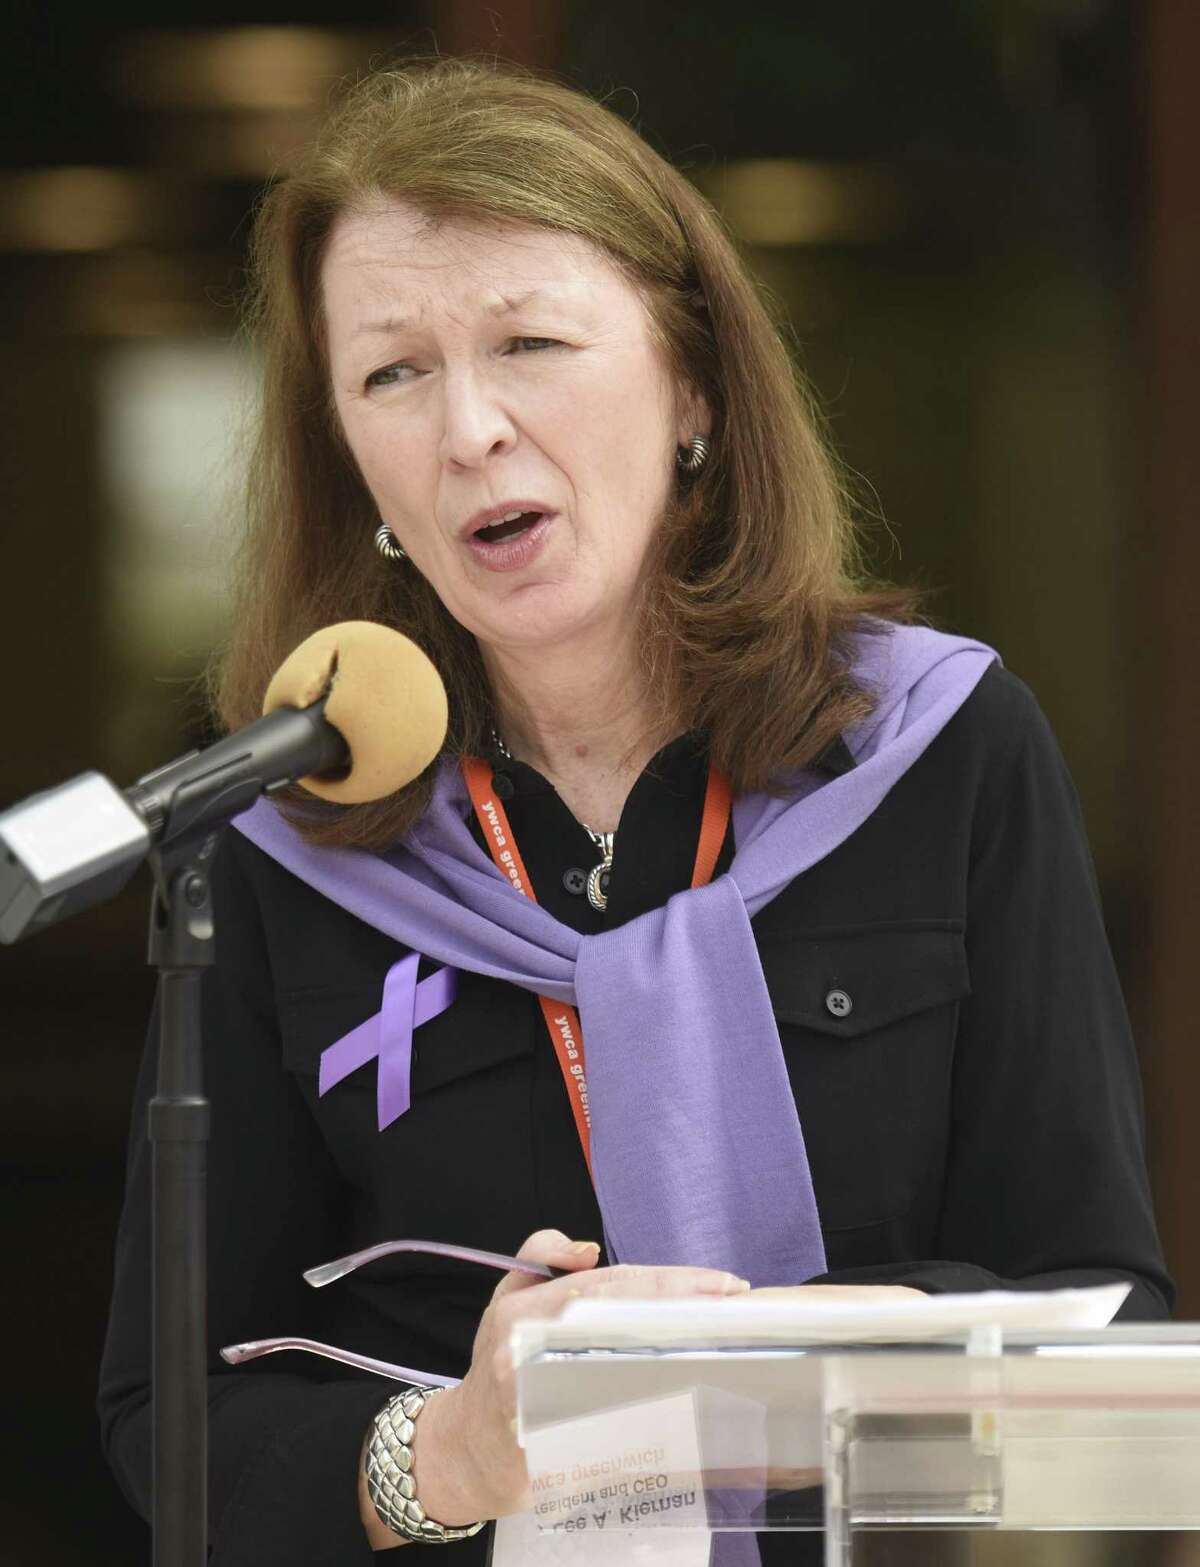 YWCA President and CEO Mary Lee A. Kiernan speaks during the Domestic Violence Awareness and Prevention Month Kickoff at Town Hall in Greenwich, Conn. Tuesday, Oct. 2, 2018. Representatives from the YWCA's domestic abuse services and Chief of Police James Heavey spoke about the prevelance of domestic violence and the importance of outreach services for victims. First Selectman Peter Tesei also read a proclamation to commemorate the start of Domestic Violence Awareness and Prevention Month. Events continue throughout the month including a candlelight vigil, art show reception, movie night and shopping event.